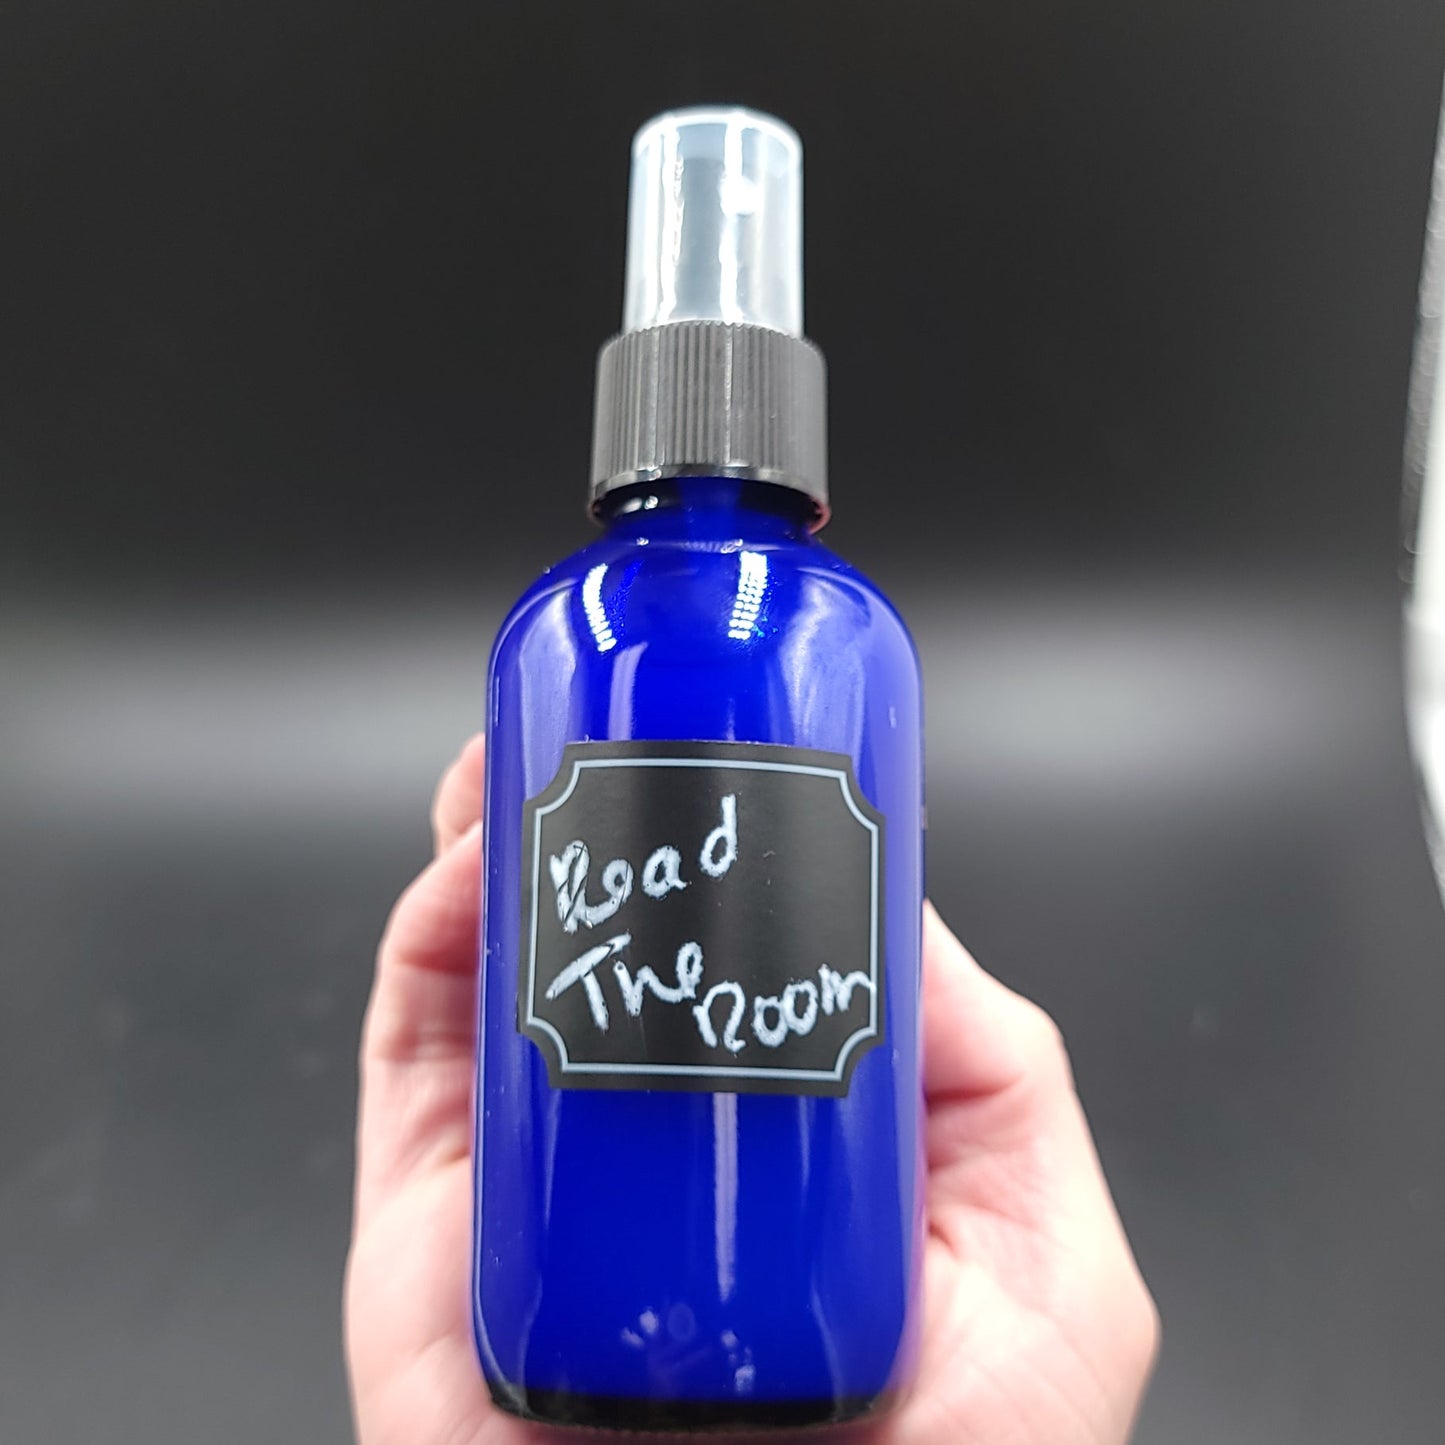 Read the Room Spray 4oz Spiritual Cologne - Elevated Metaphysical